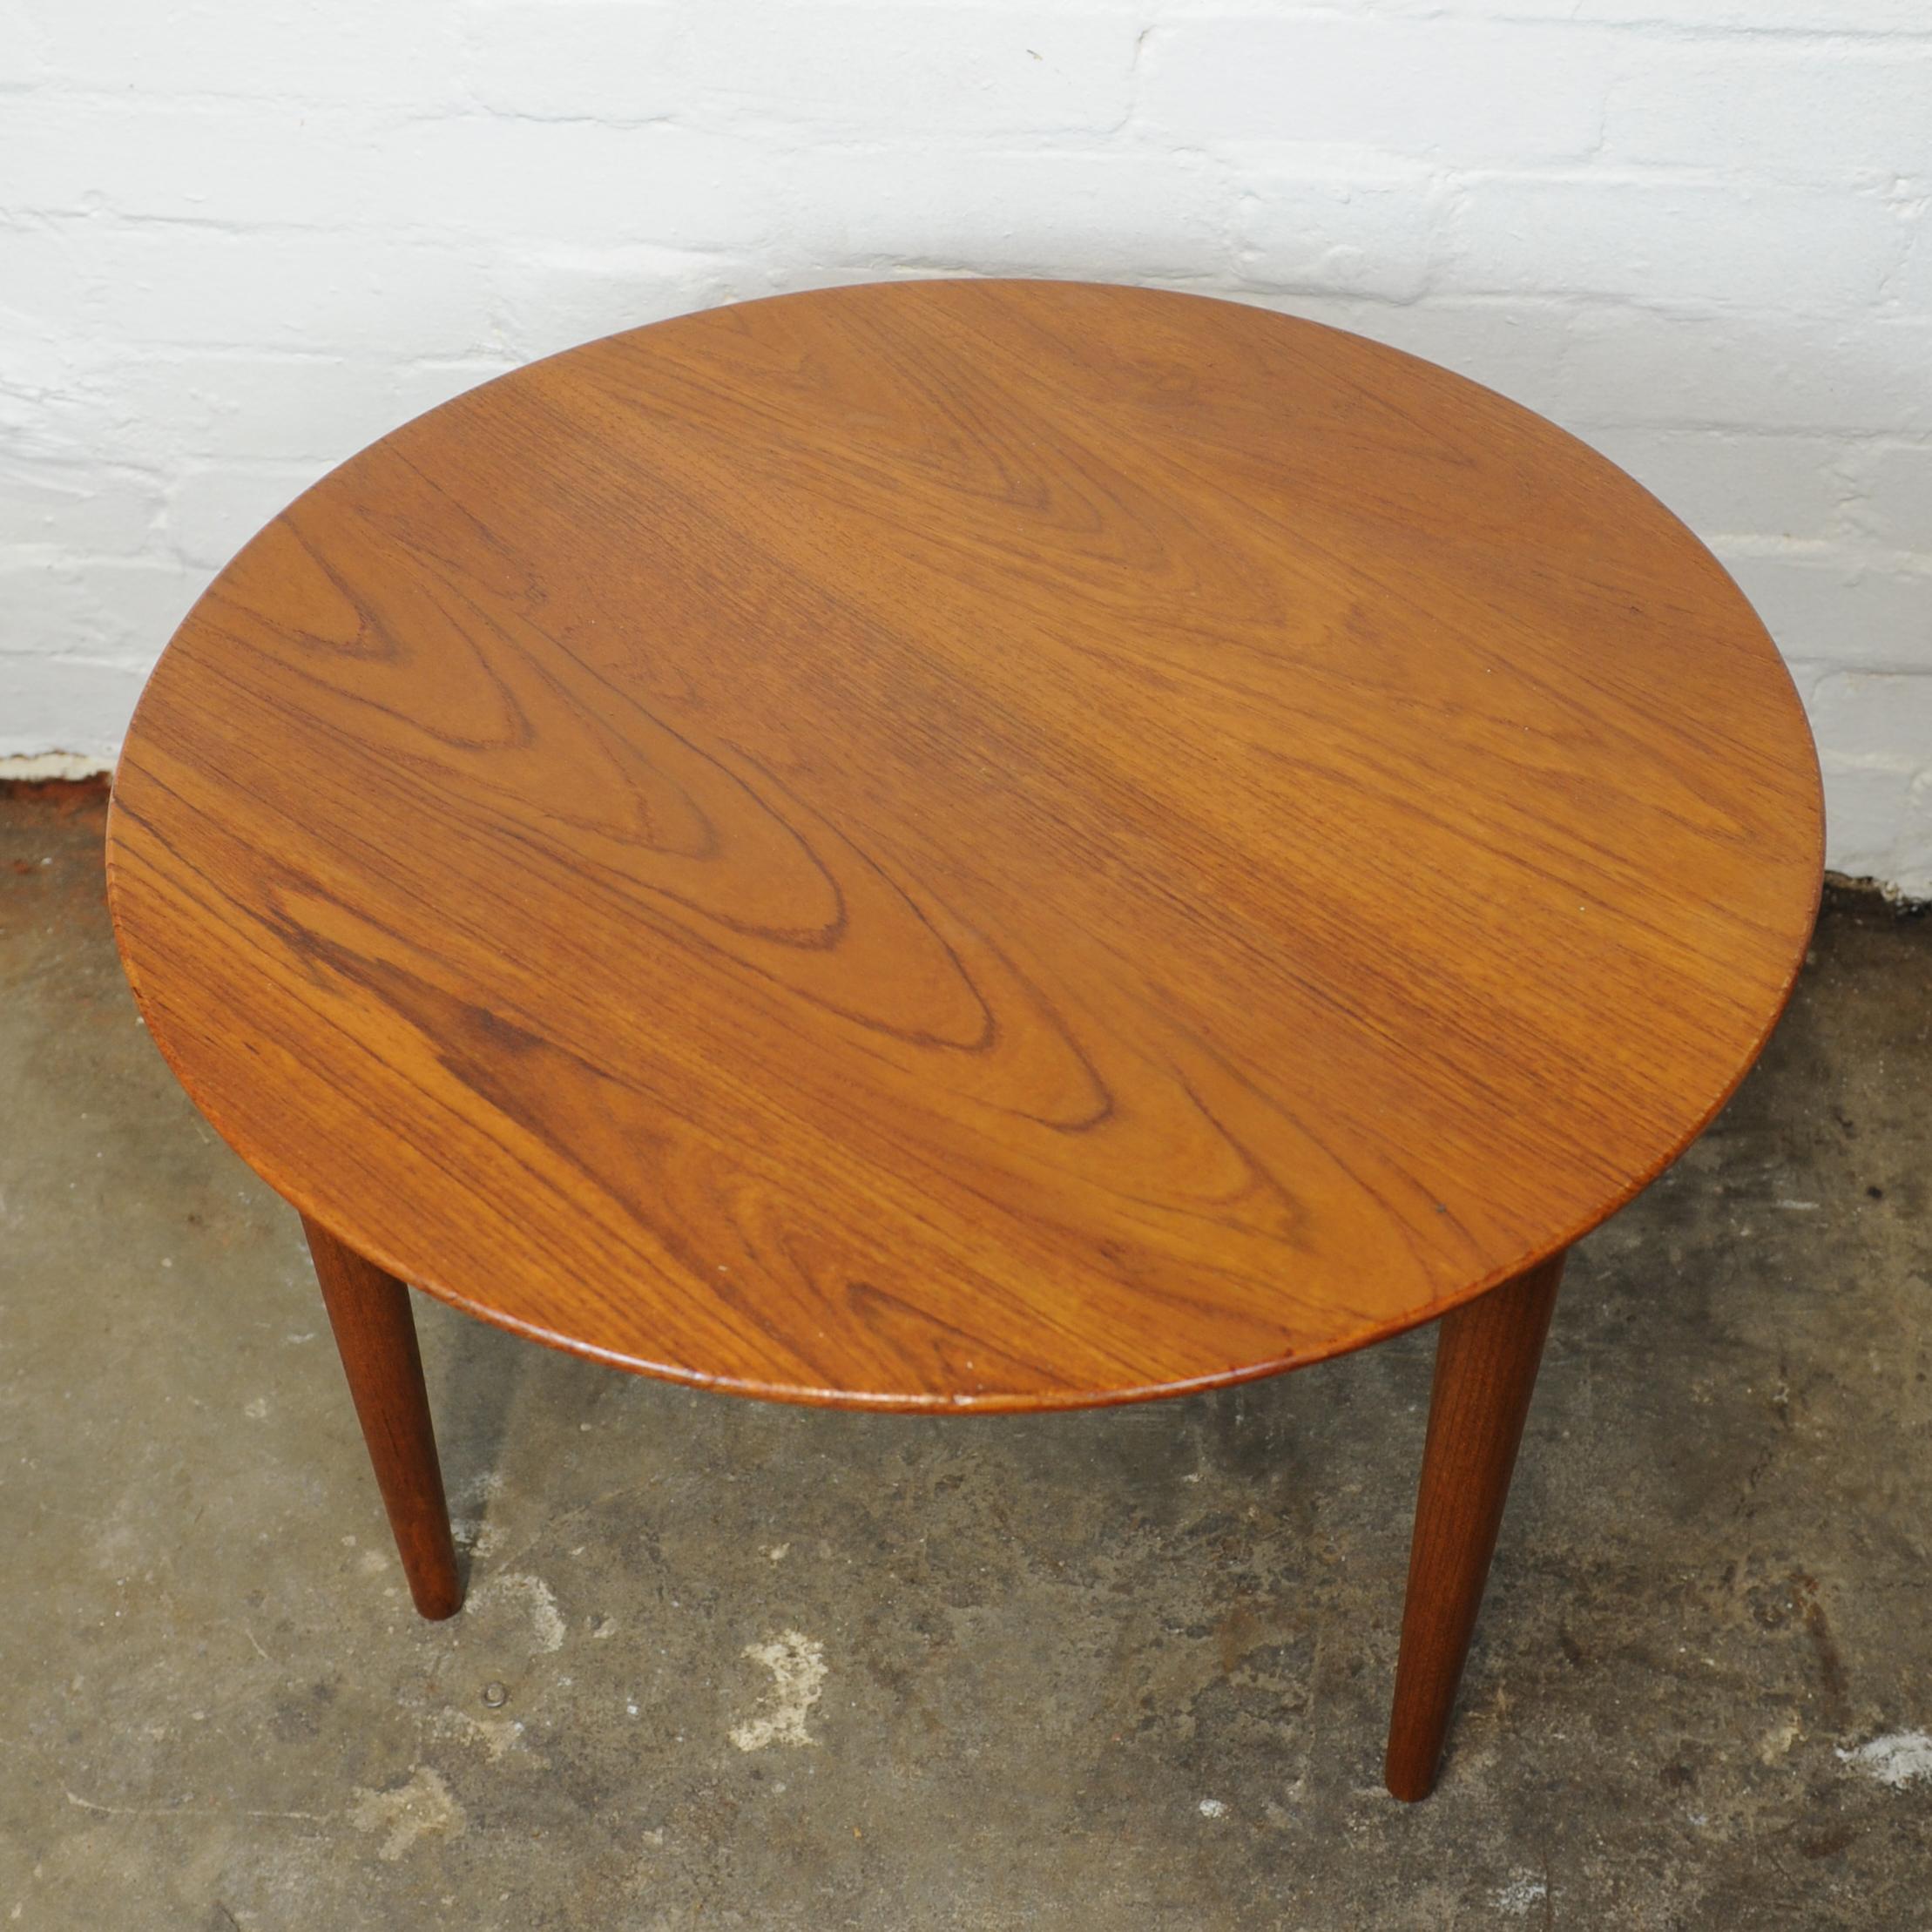 Round Teak Three Legged Coffee Table by Norsk Design Ltd, 1960s In Good Condition For Sale In Chesham, GB